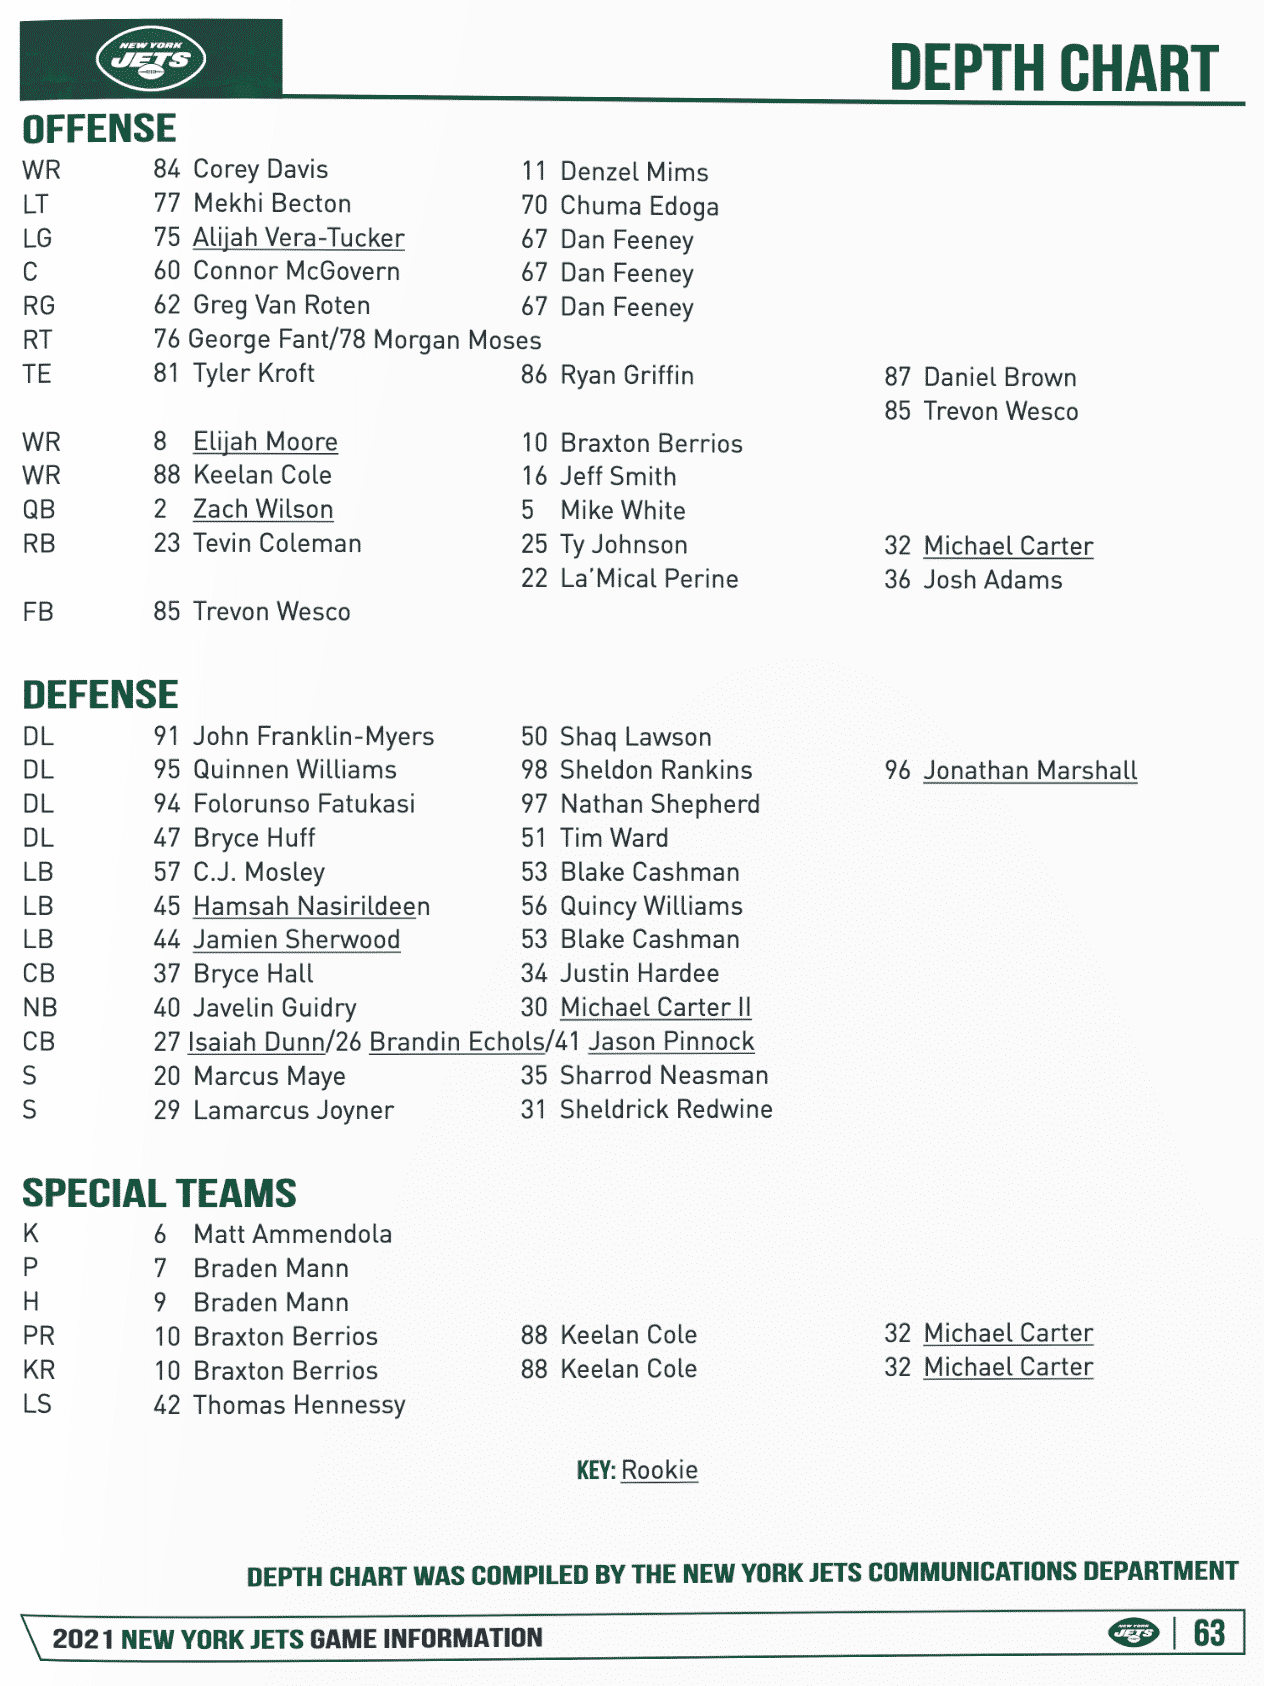 New York Jets release unofficial depth chart ahead of Panthers game